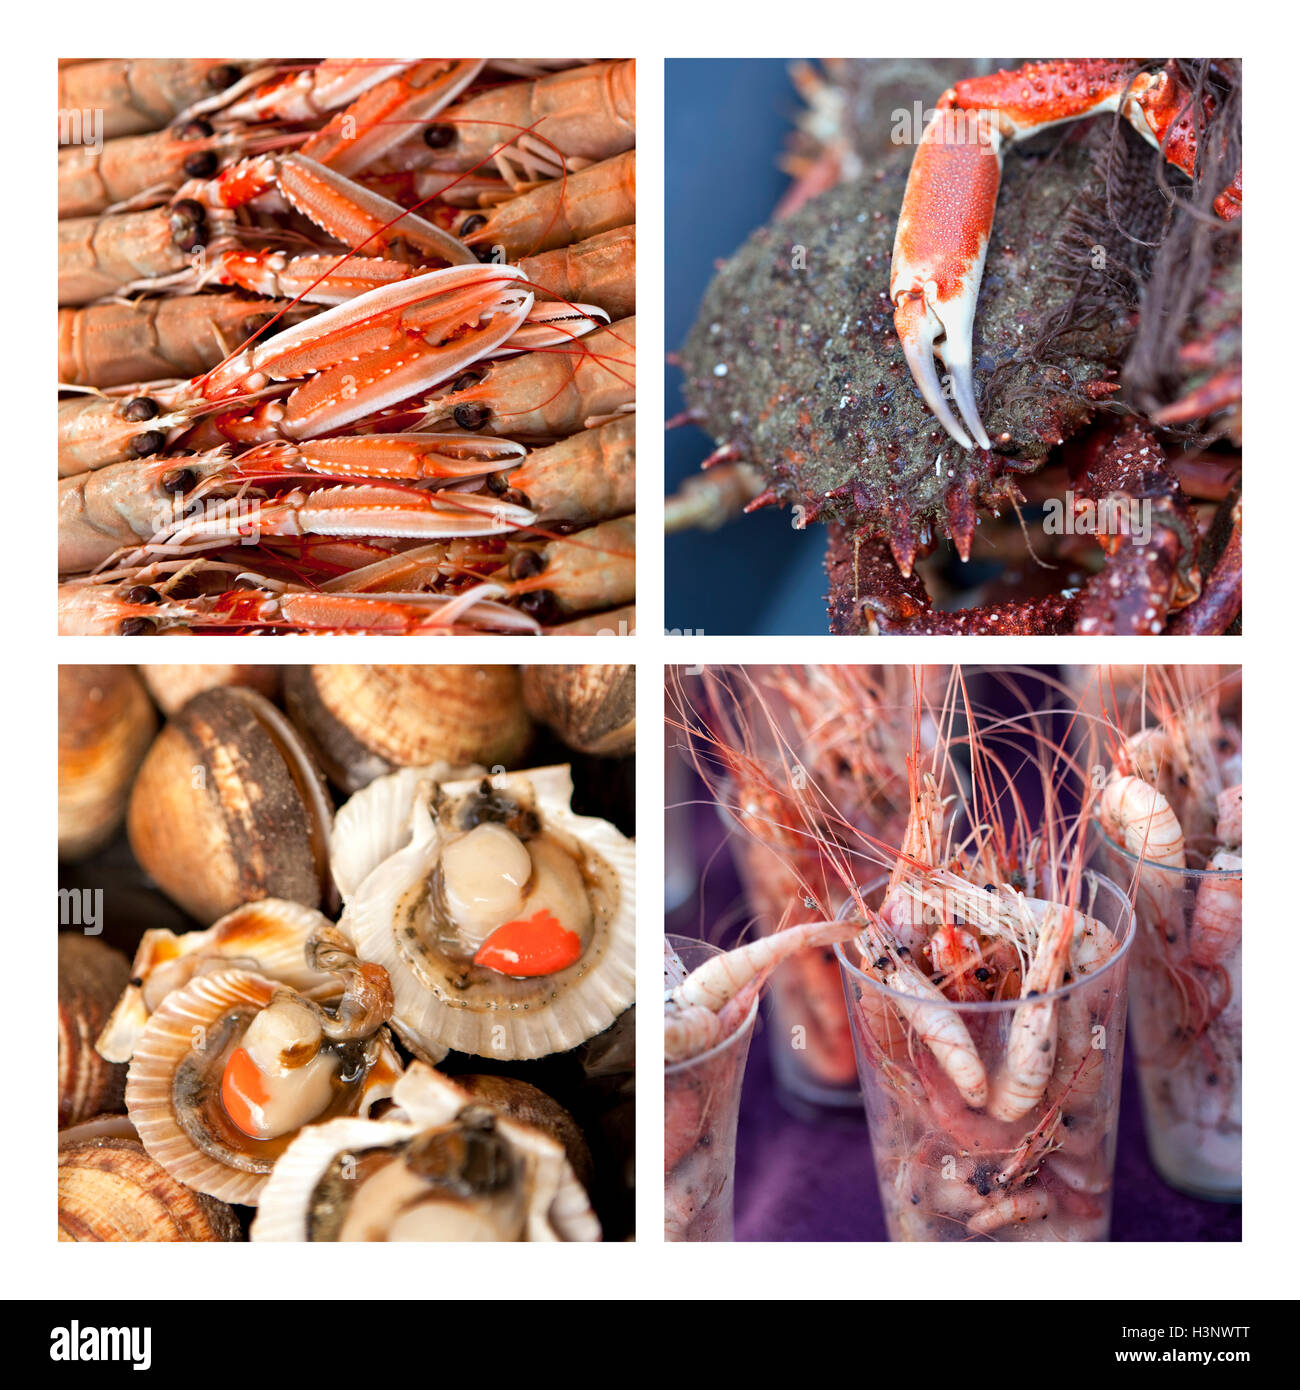 Collage of various sea food on a market stall Stock Photo